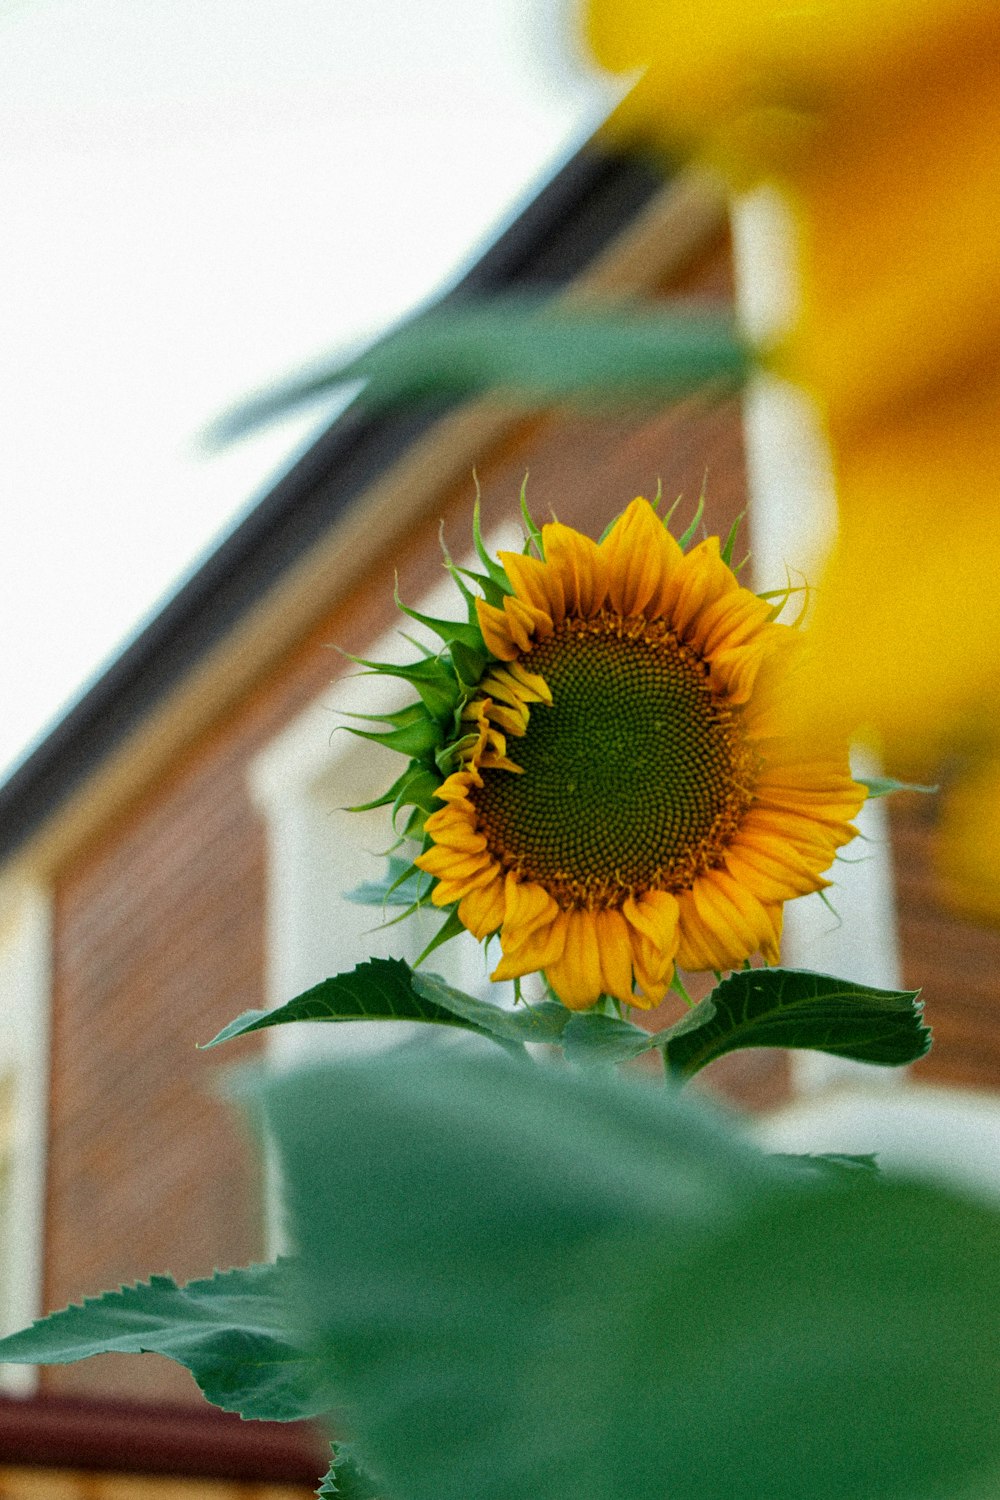 a sunflower is blooming in front of a house